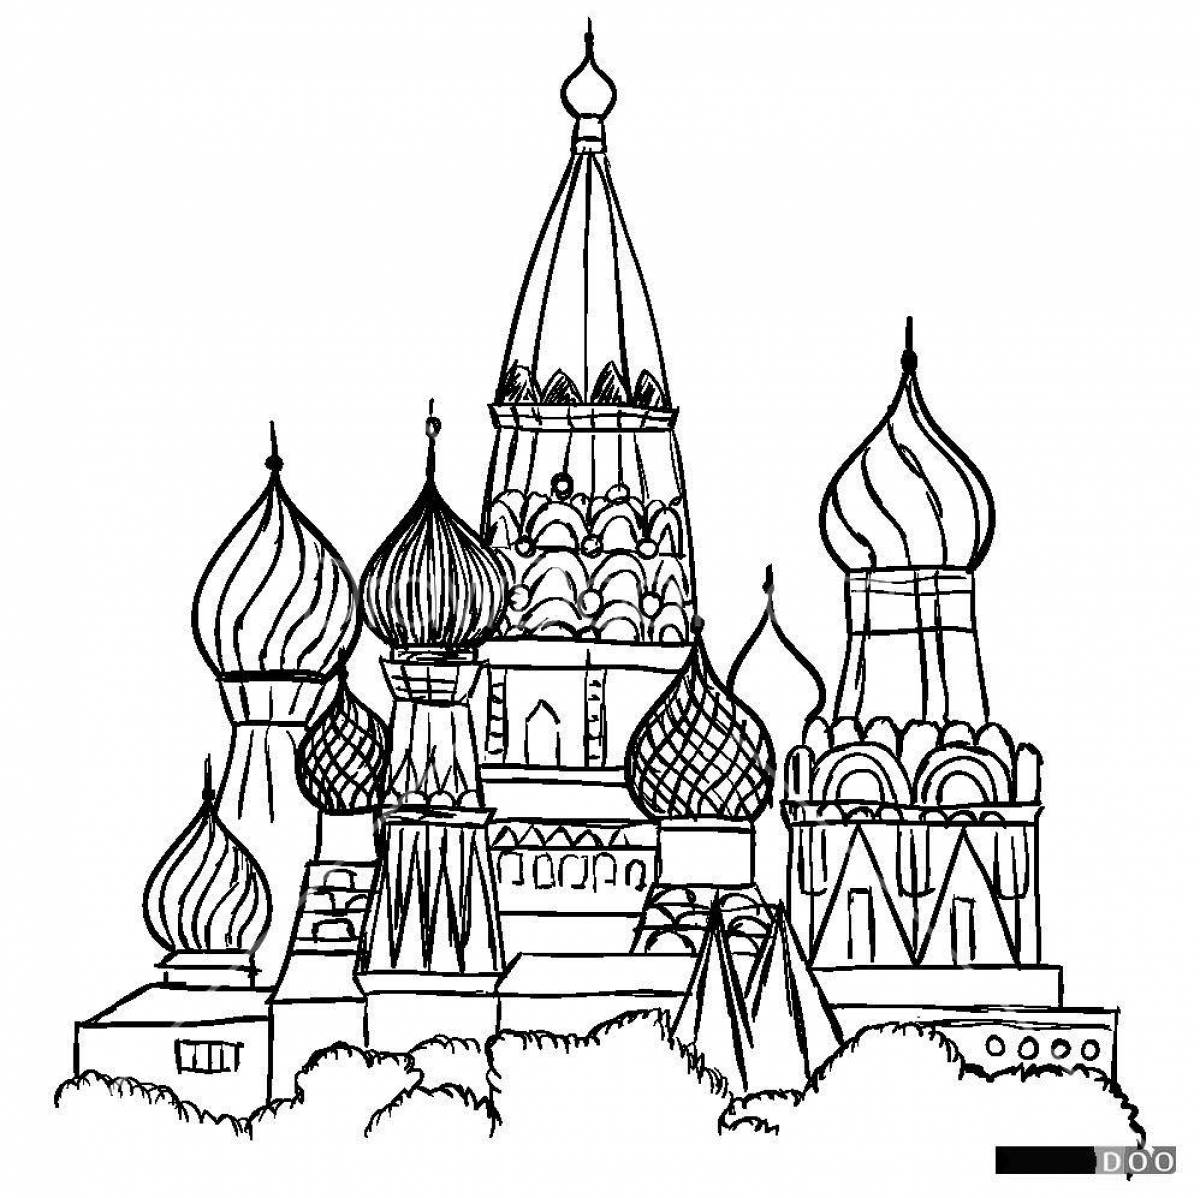 Coloring page wonderful st basil's church